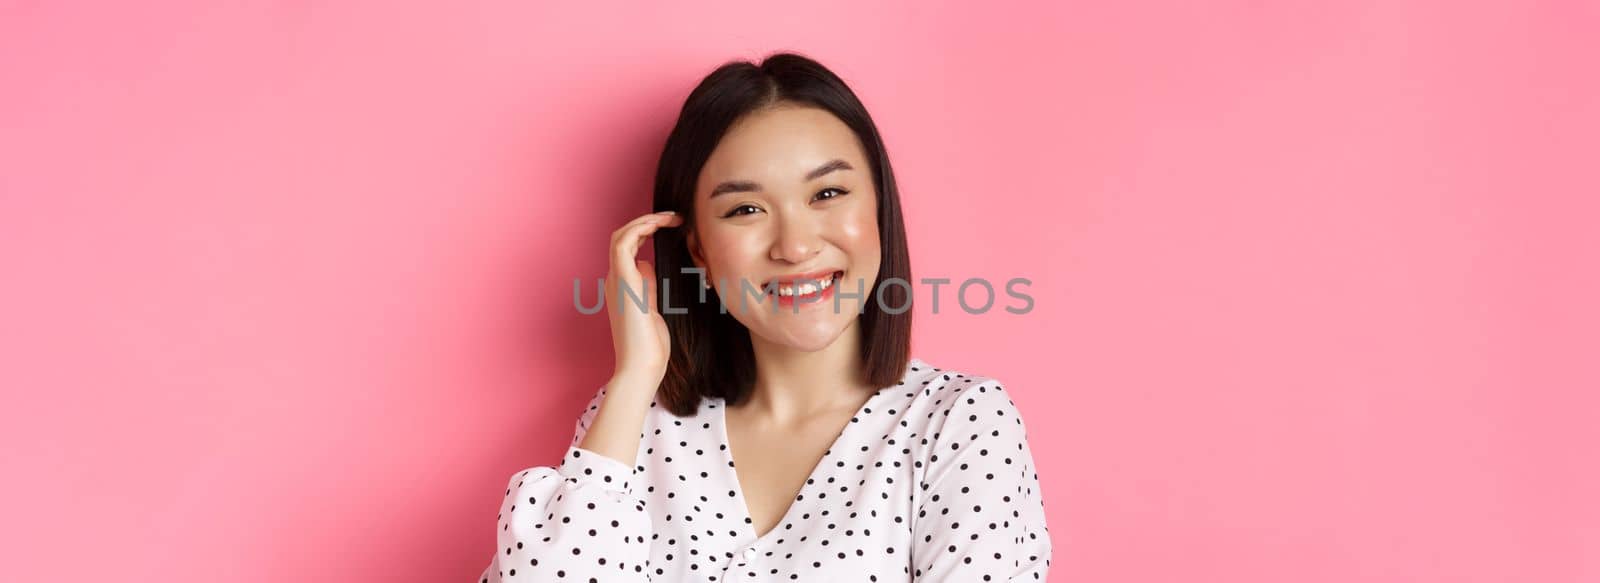 Close-up of beautiful asian woman smiling happy, touching new haircut, standing over pink background.